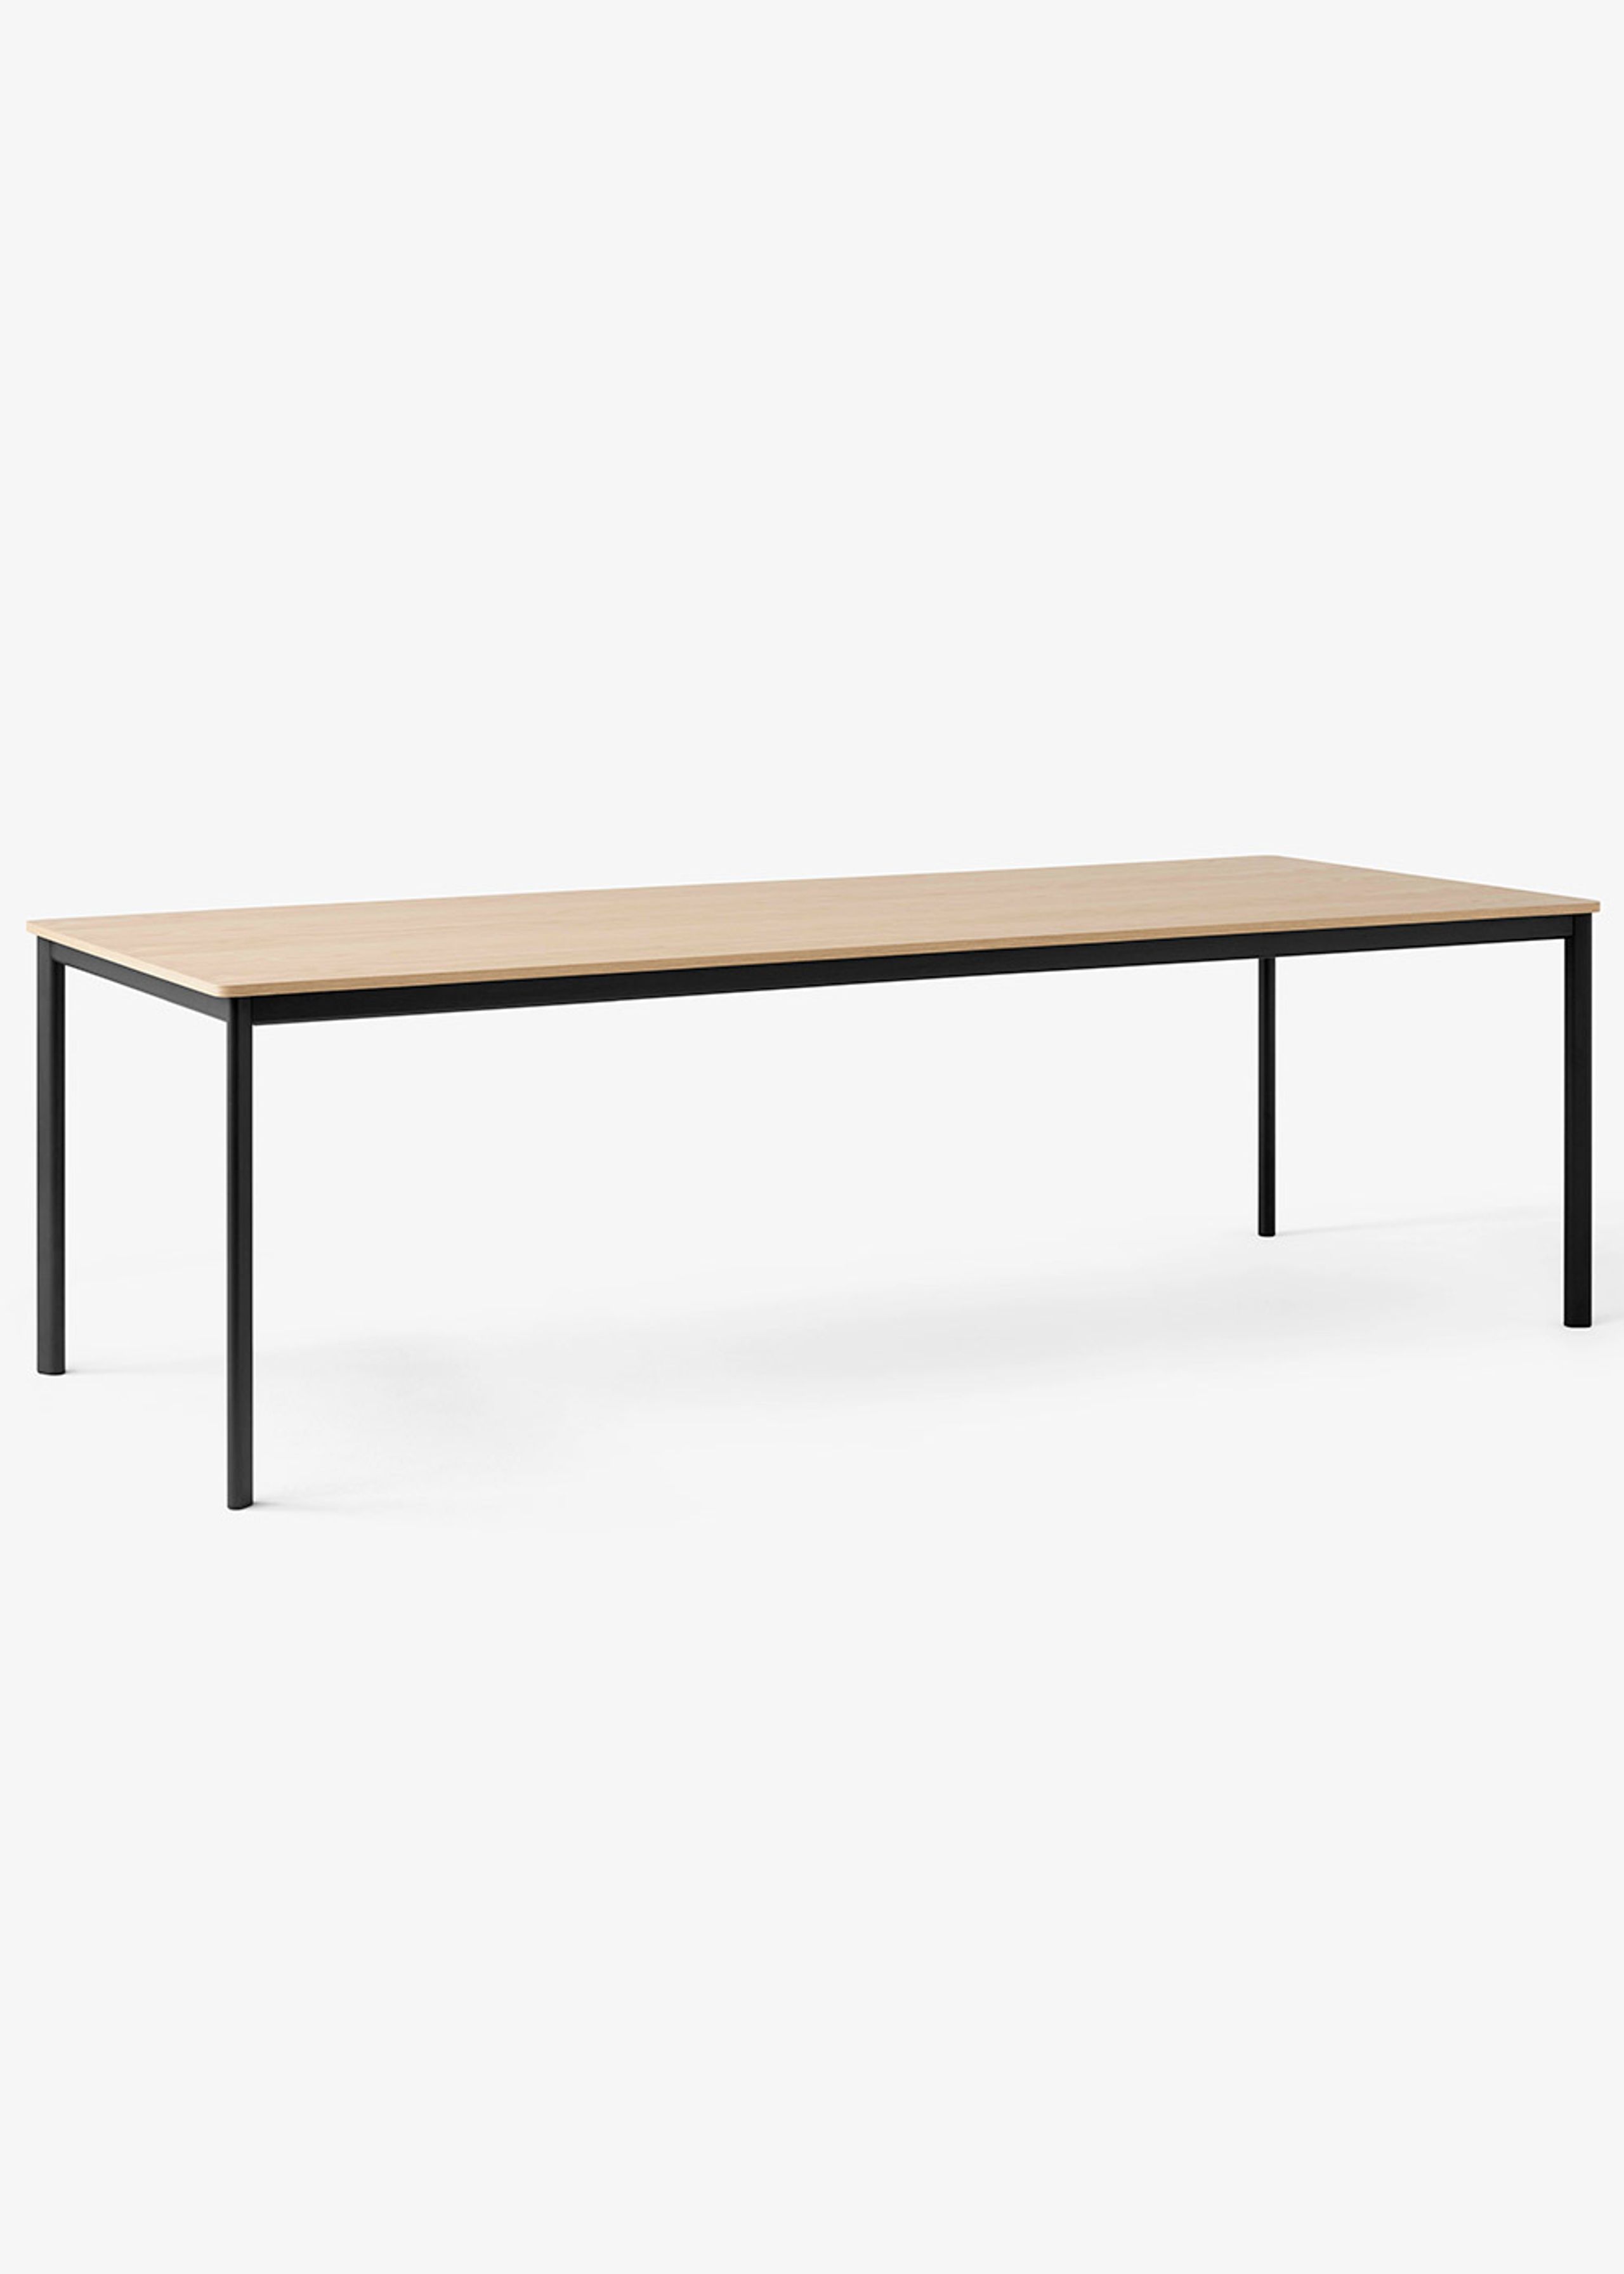 Drip HW60 - Table - &tradition